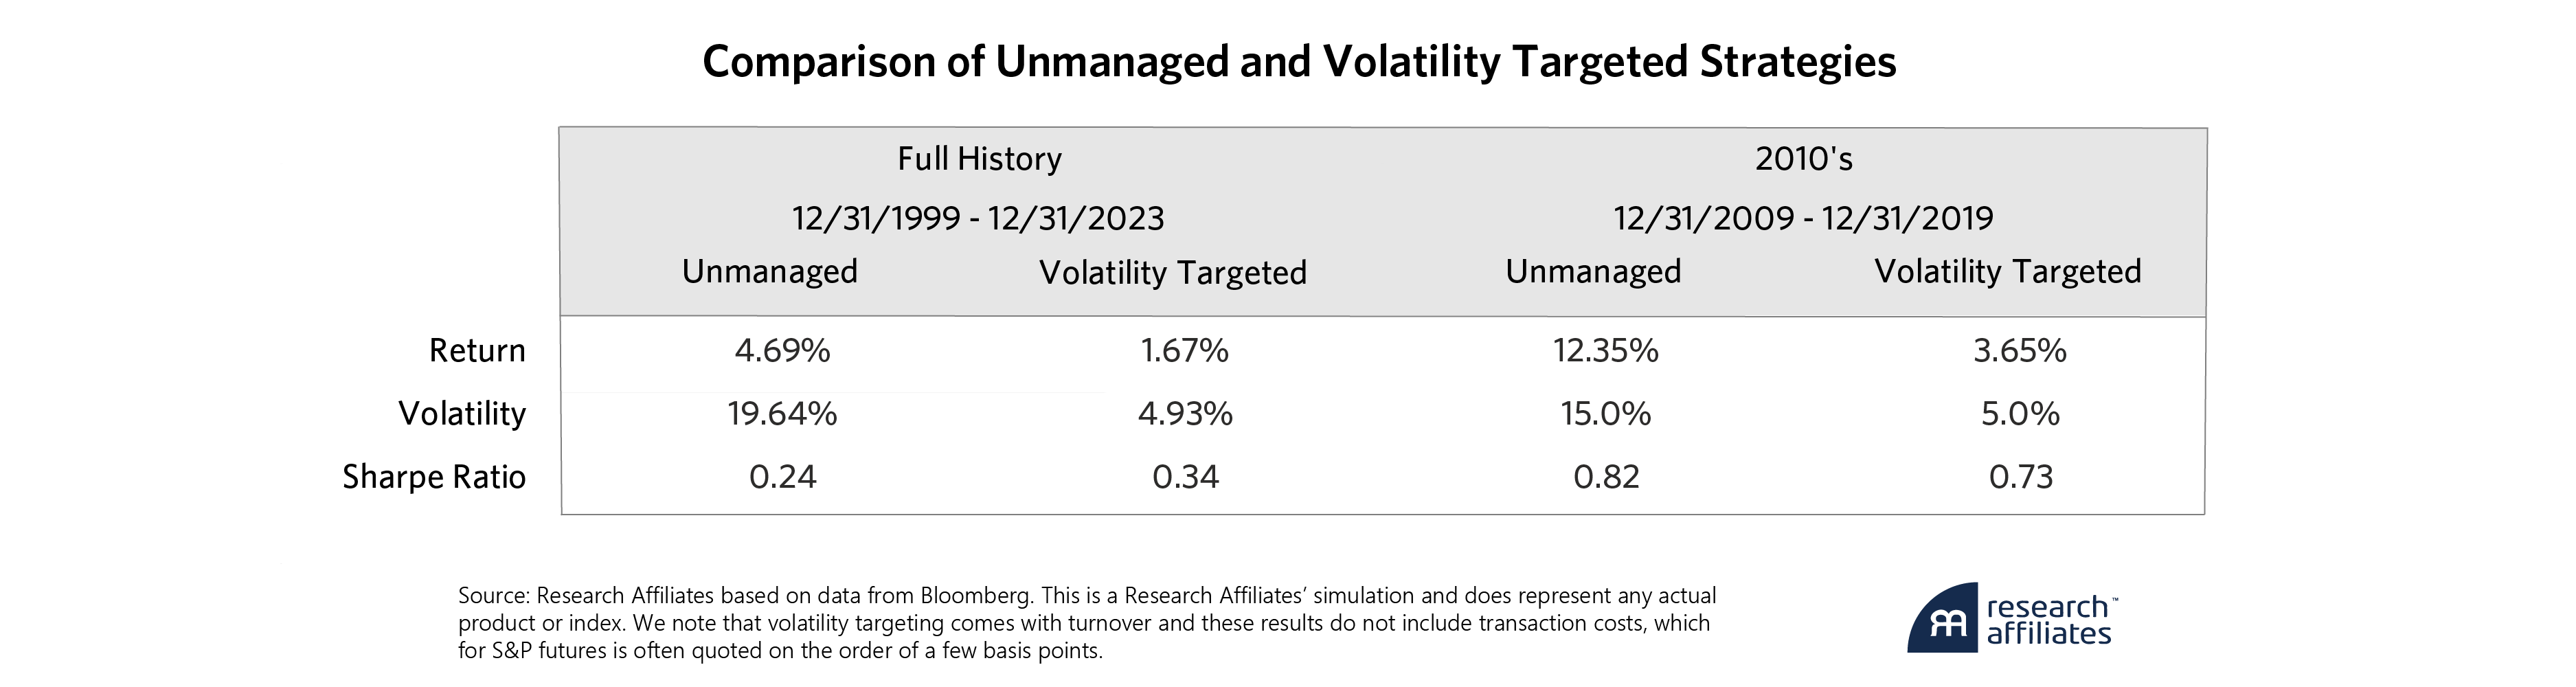 1014-harnessing-volatility-targeting-table-1